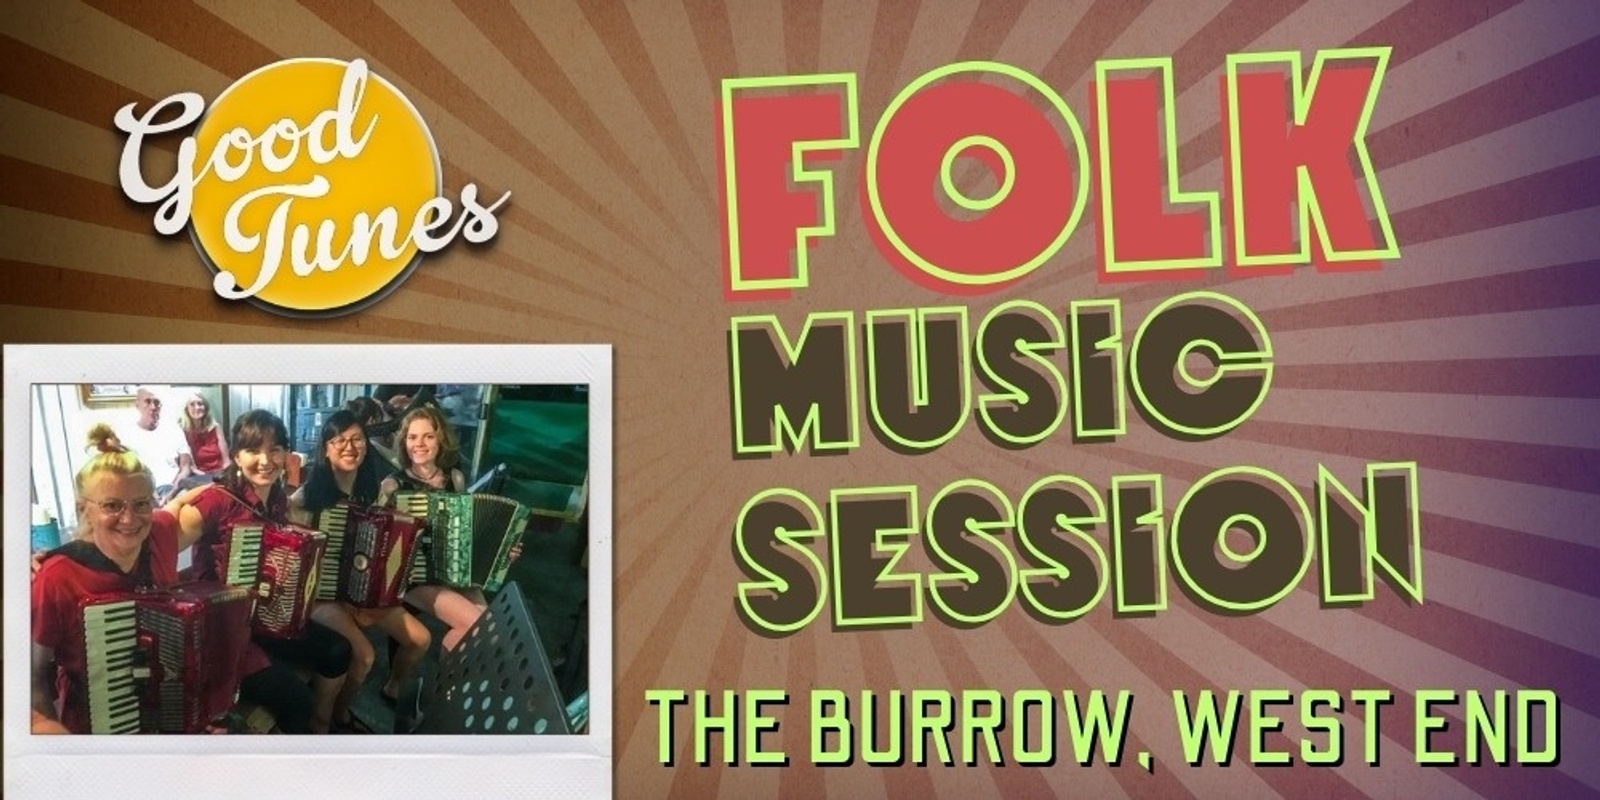 Banner image for Good Tunes Session 29 April